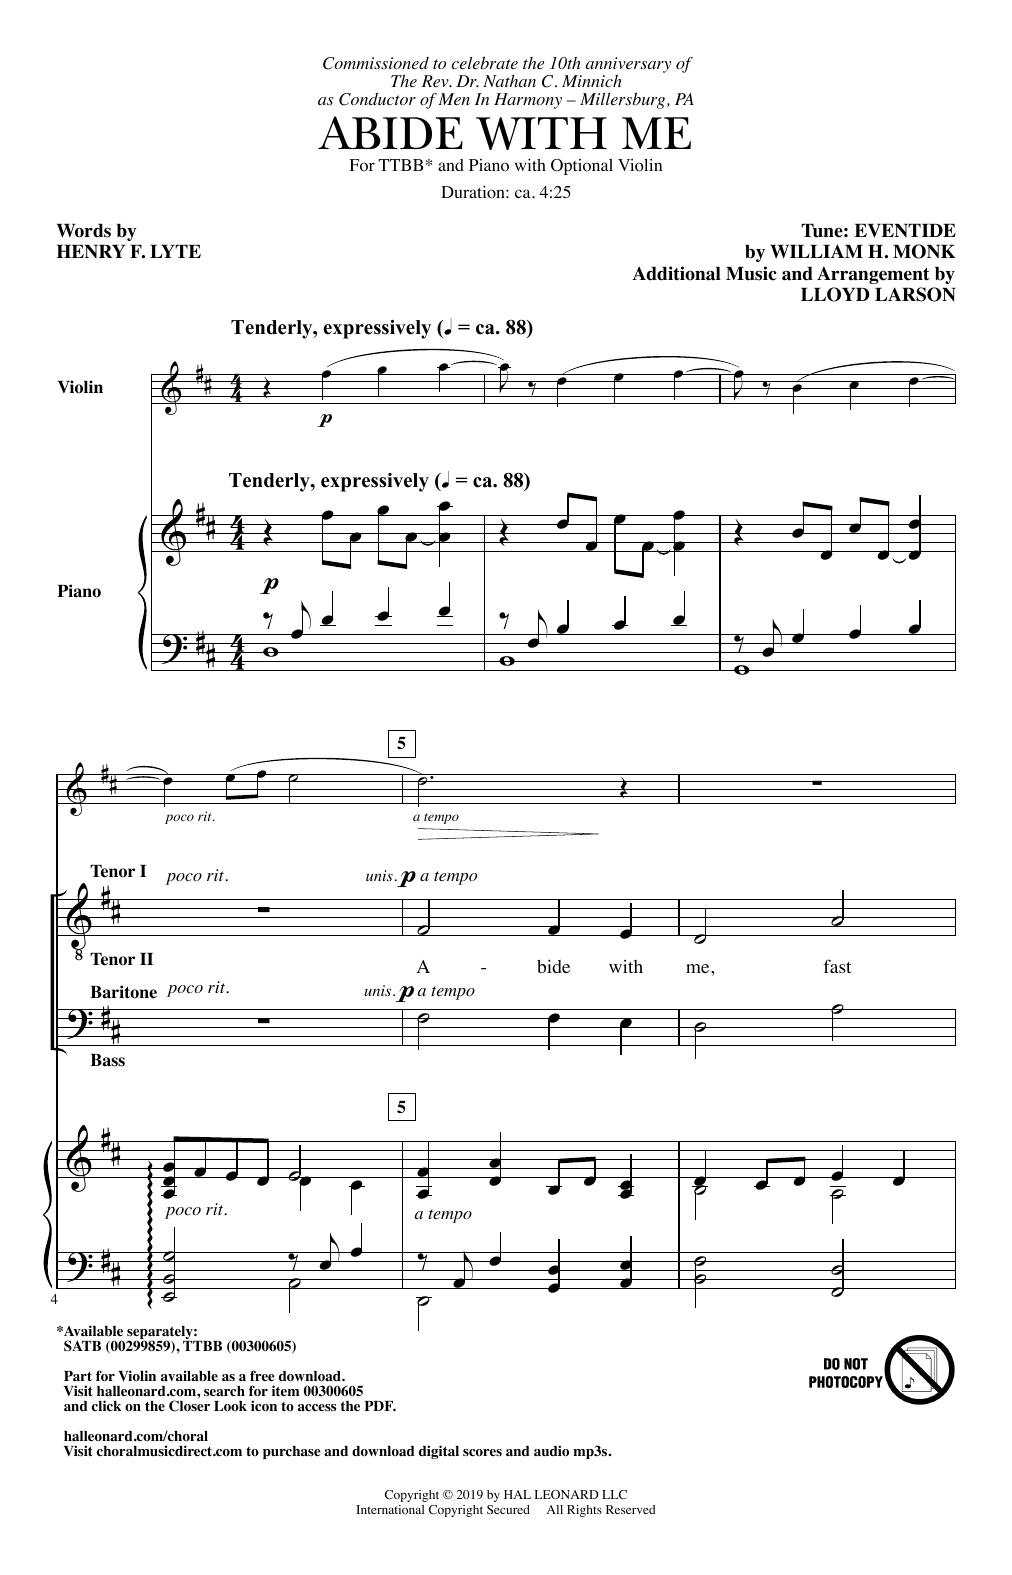 Download Henry F. Lyte Abide With Me (arr. Lloyd Larson) Sheet Music